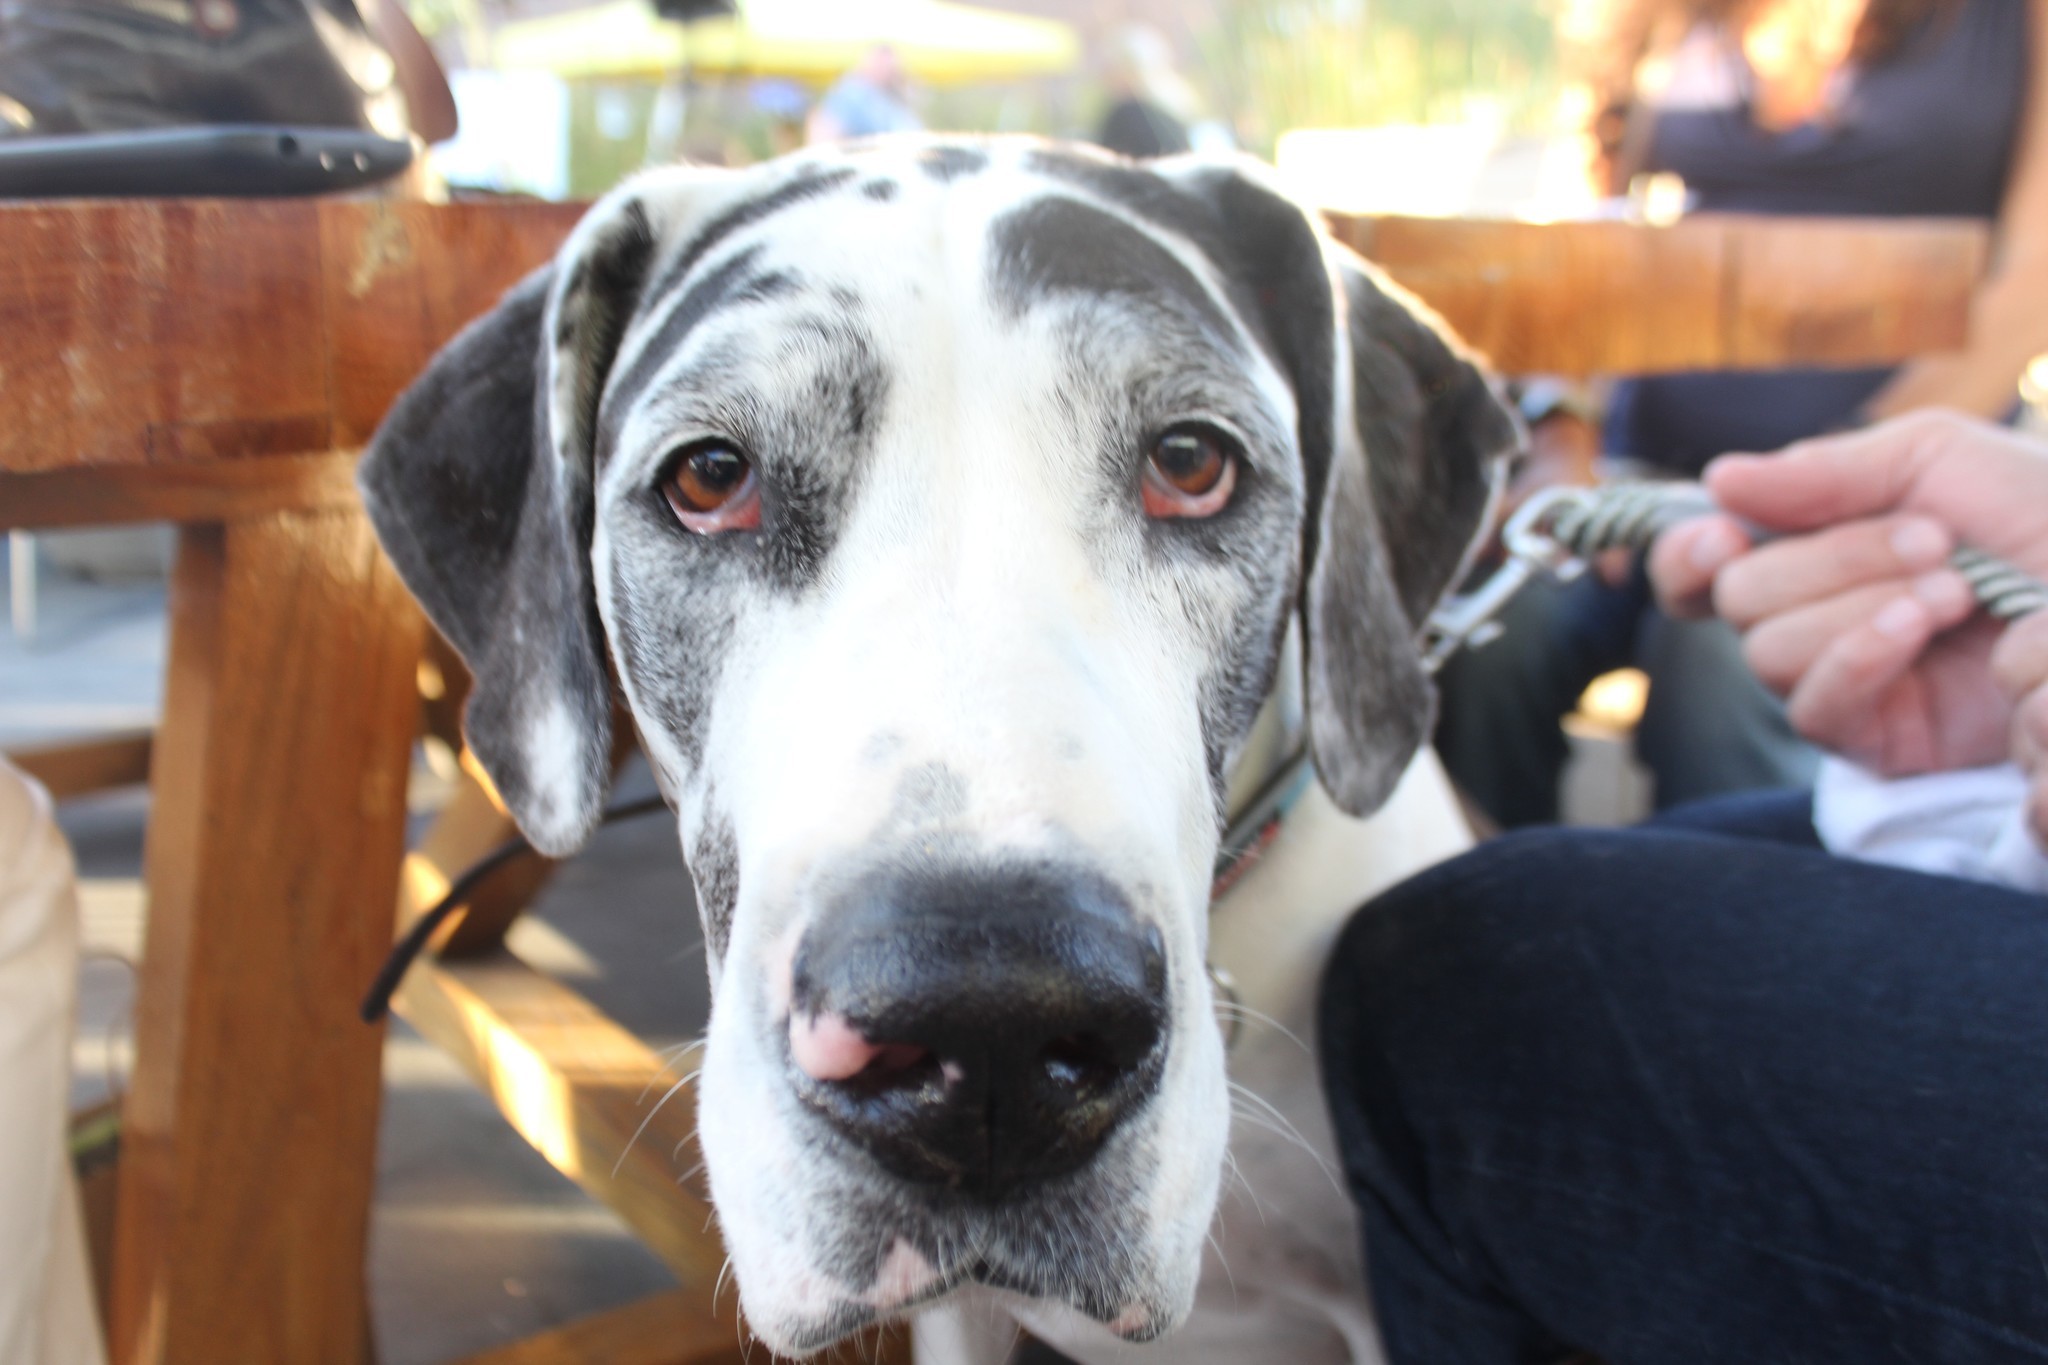 Edwina the Great Dane wants to know what you’re looking at.